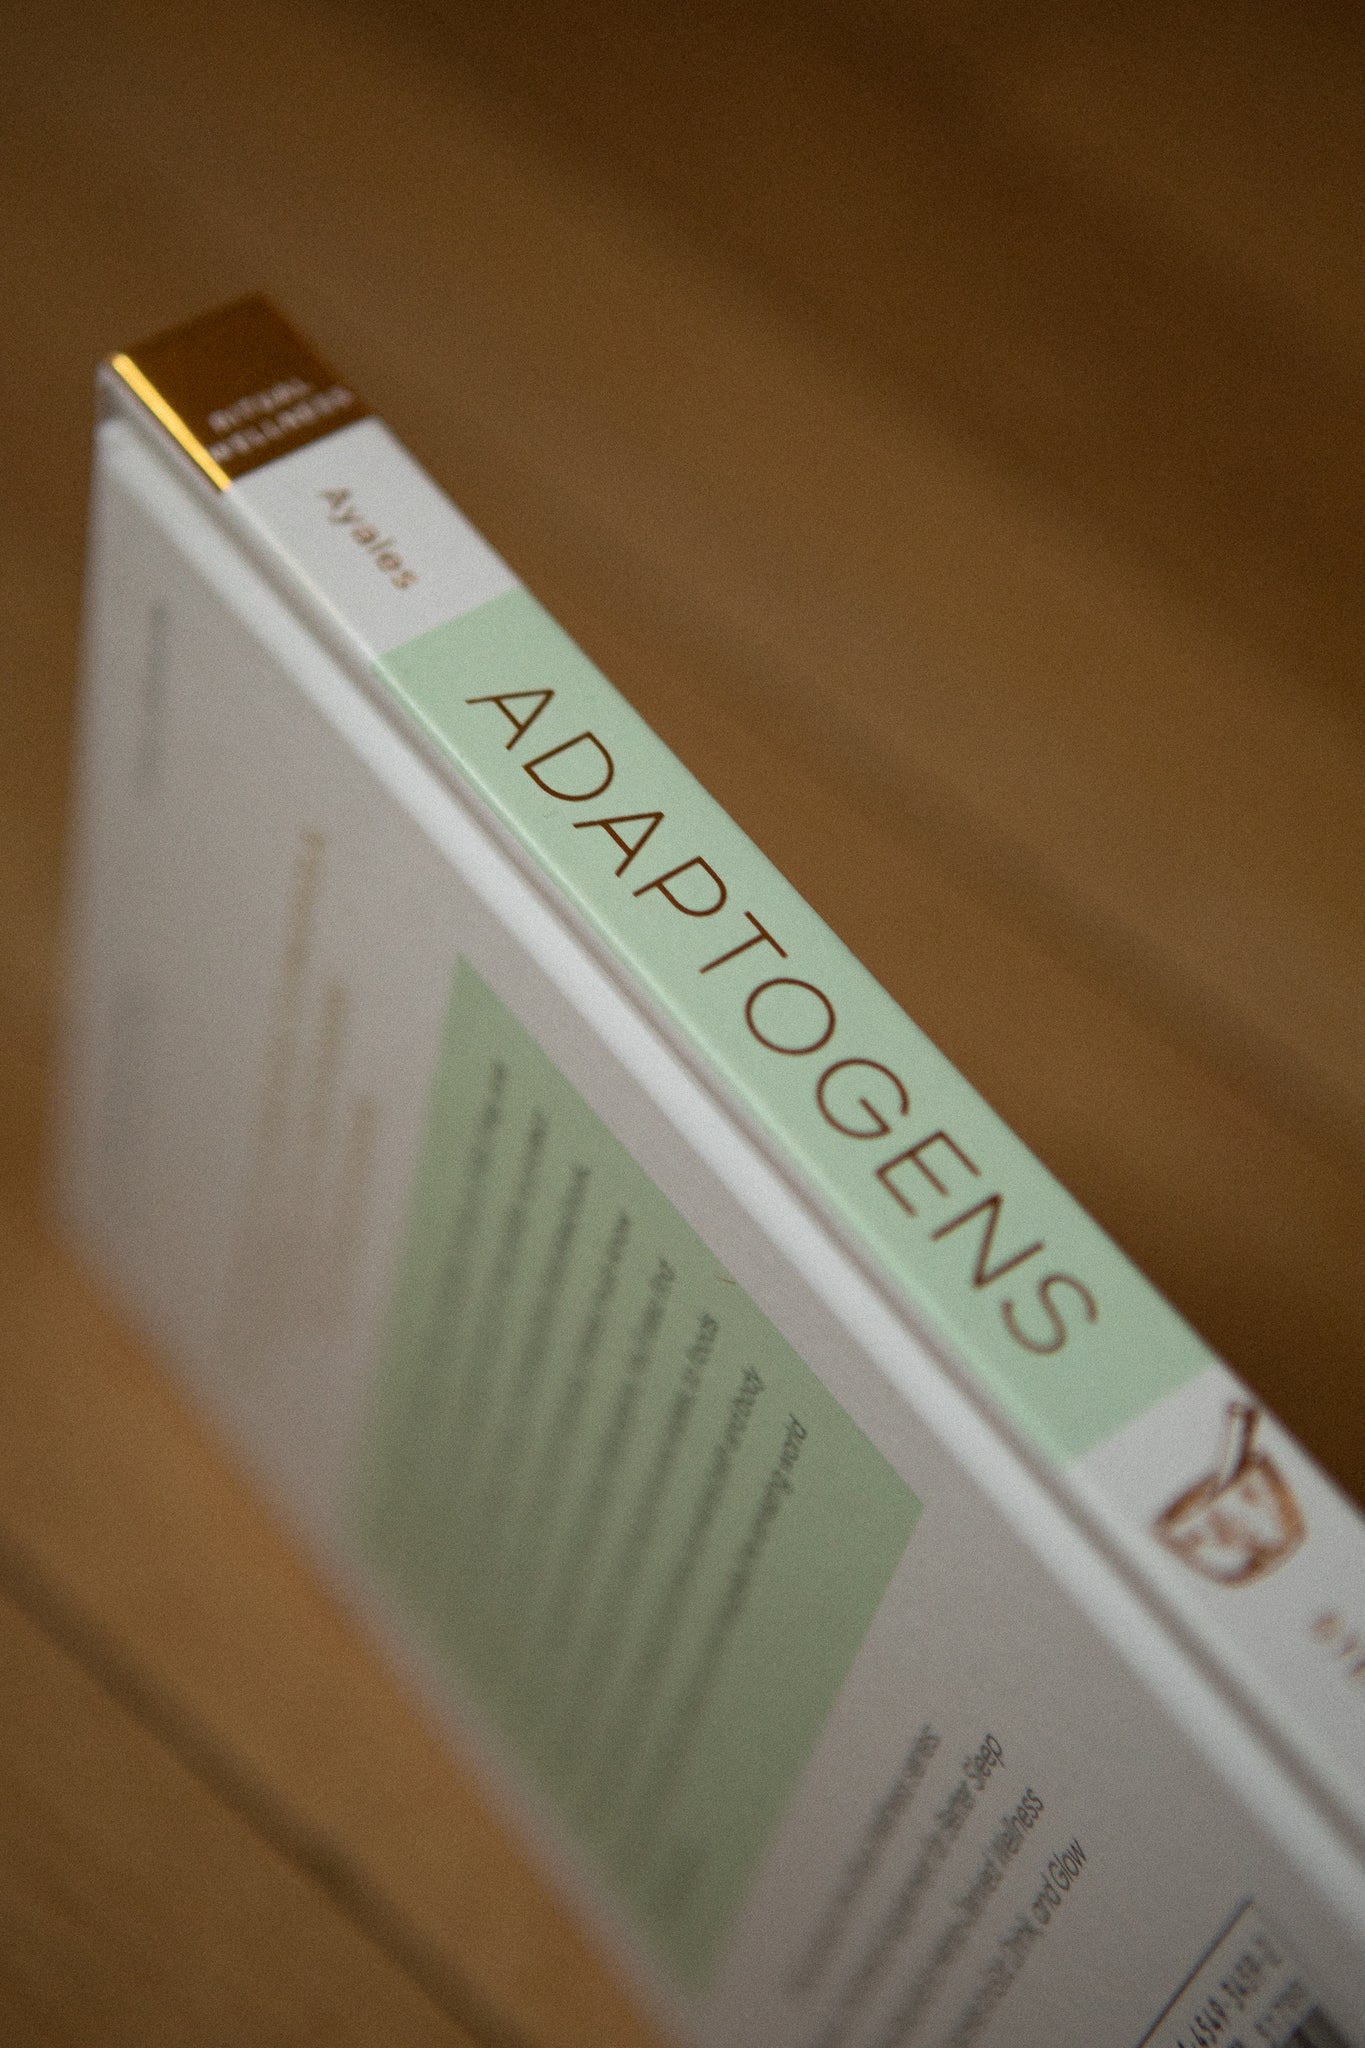 Book: Adaptogens - Herbs for longevity and Everyday Wellness